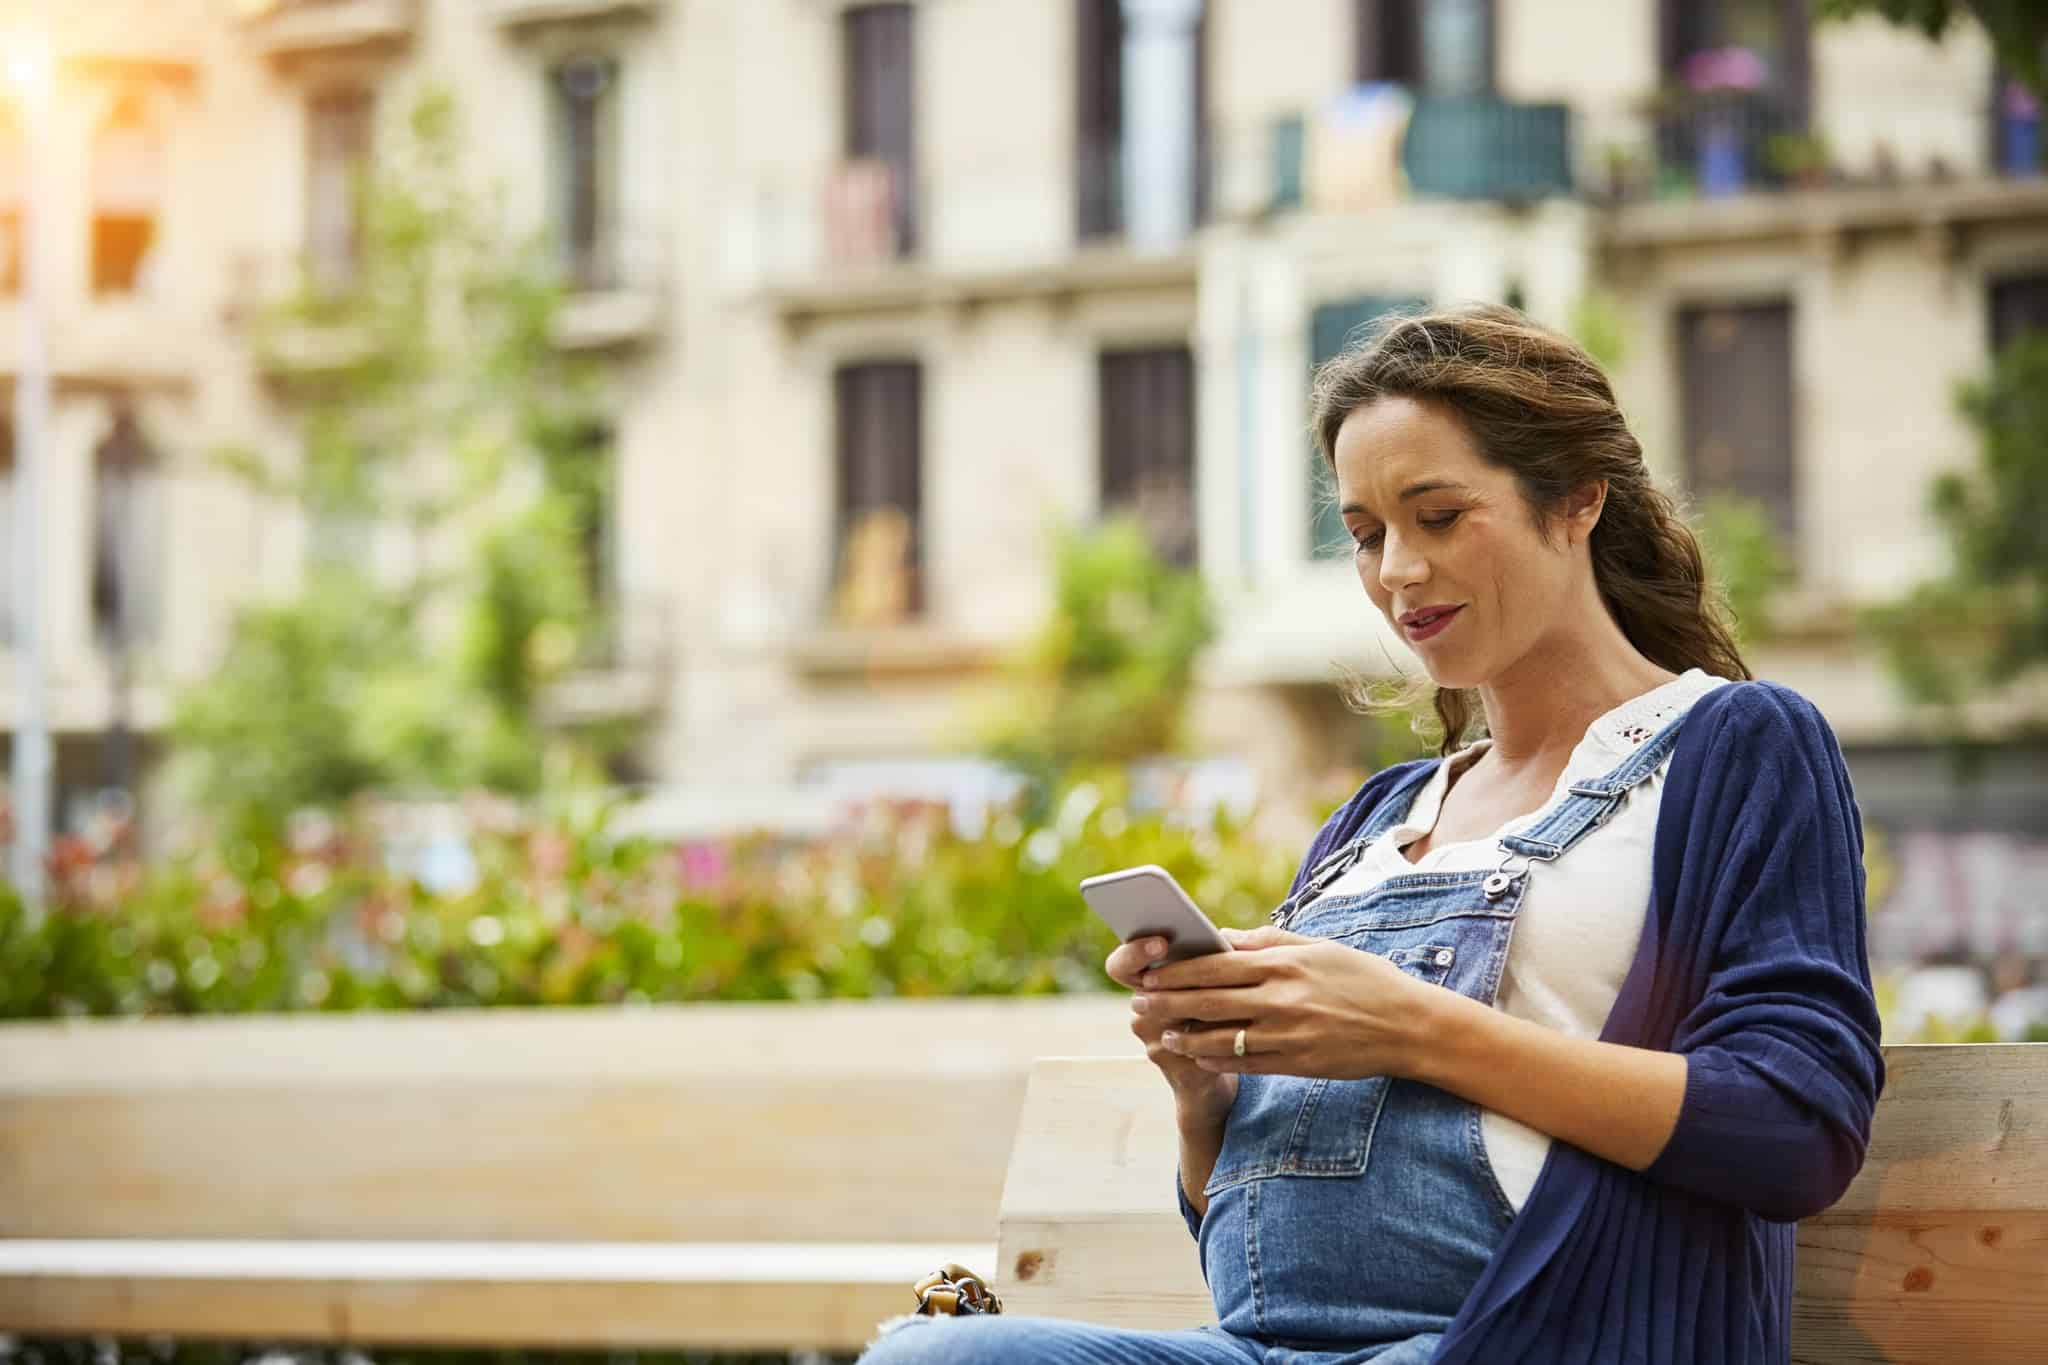 Pregnant woman wearing overalls, sitting on a bench and looking at her phone.